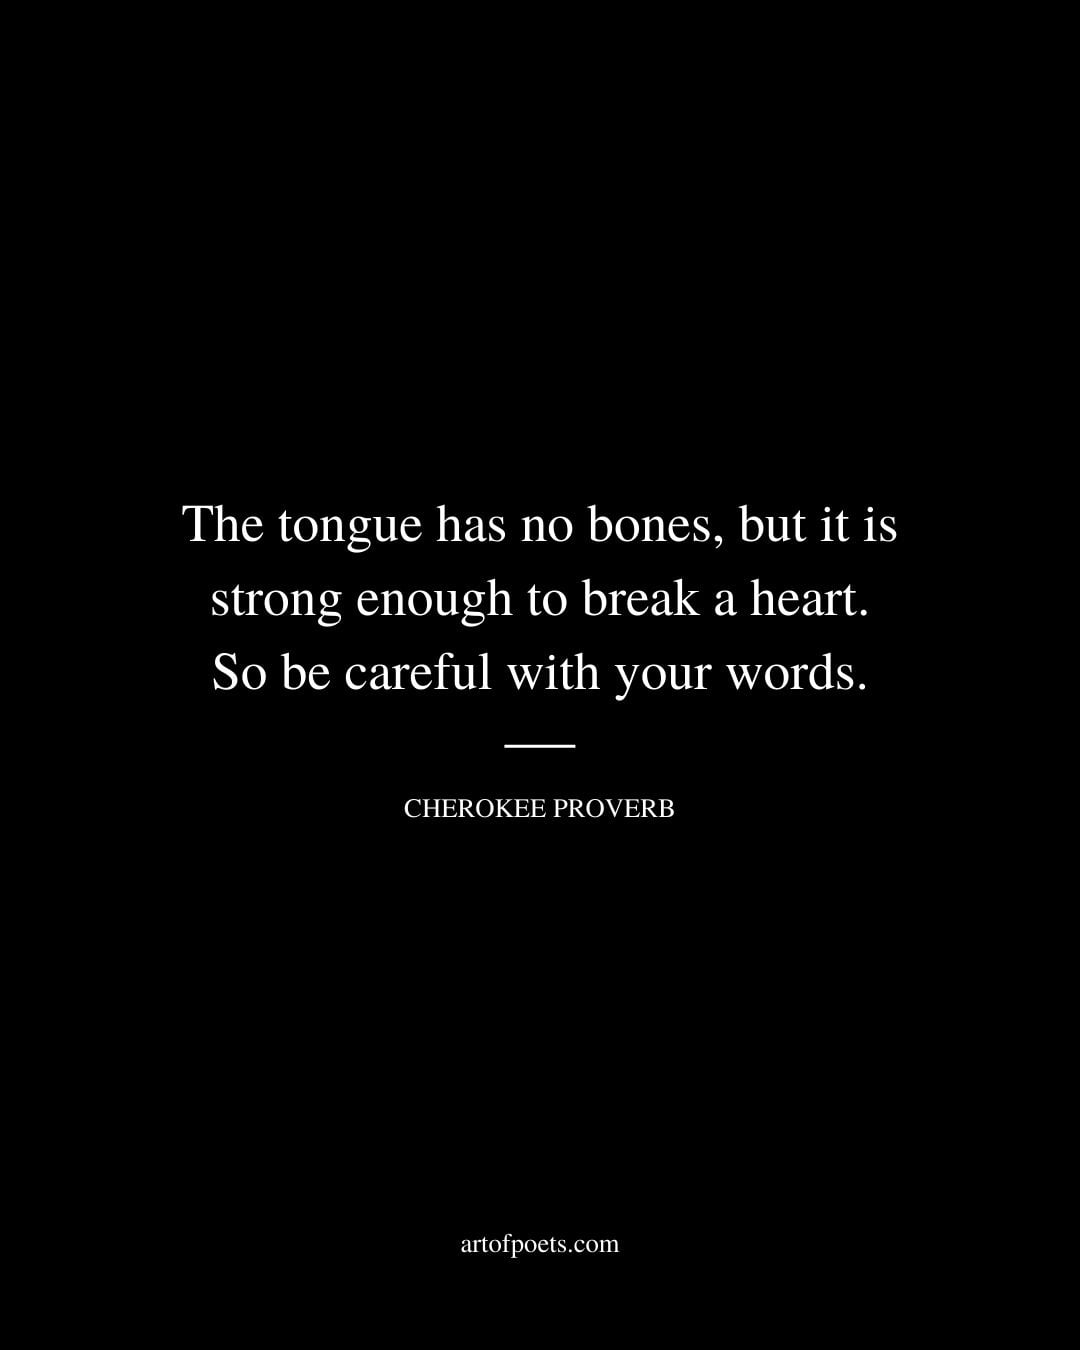 The tongue has no bones but it is strong enough to break a heart. So be careful with your words